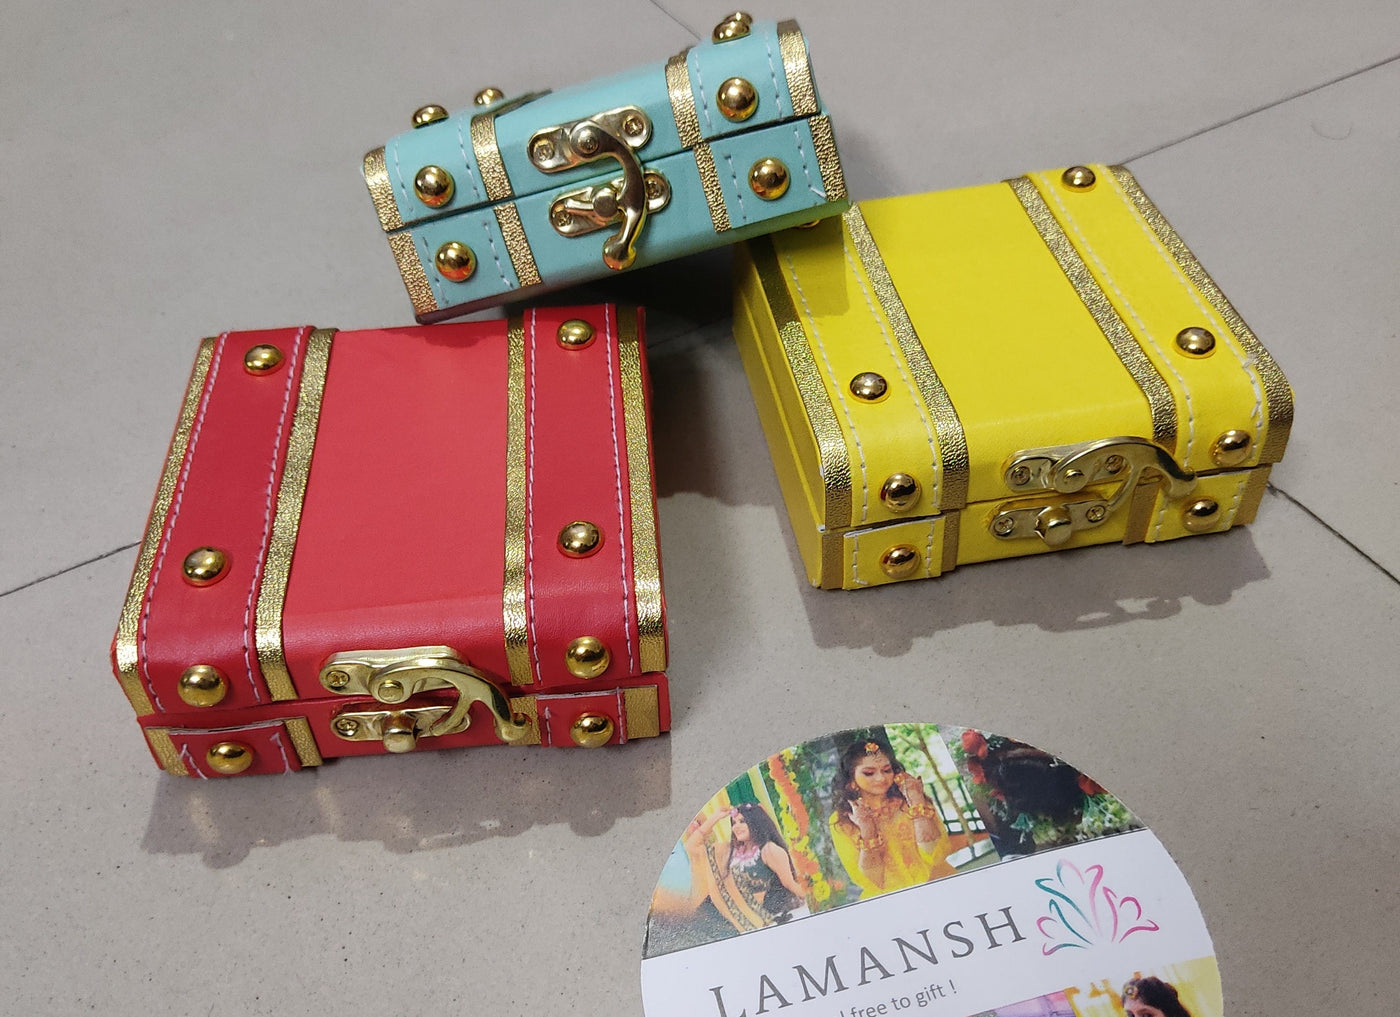 LAMANSH® (4*4*2.15 inch) Leatherette mini trunk boxes for gifting